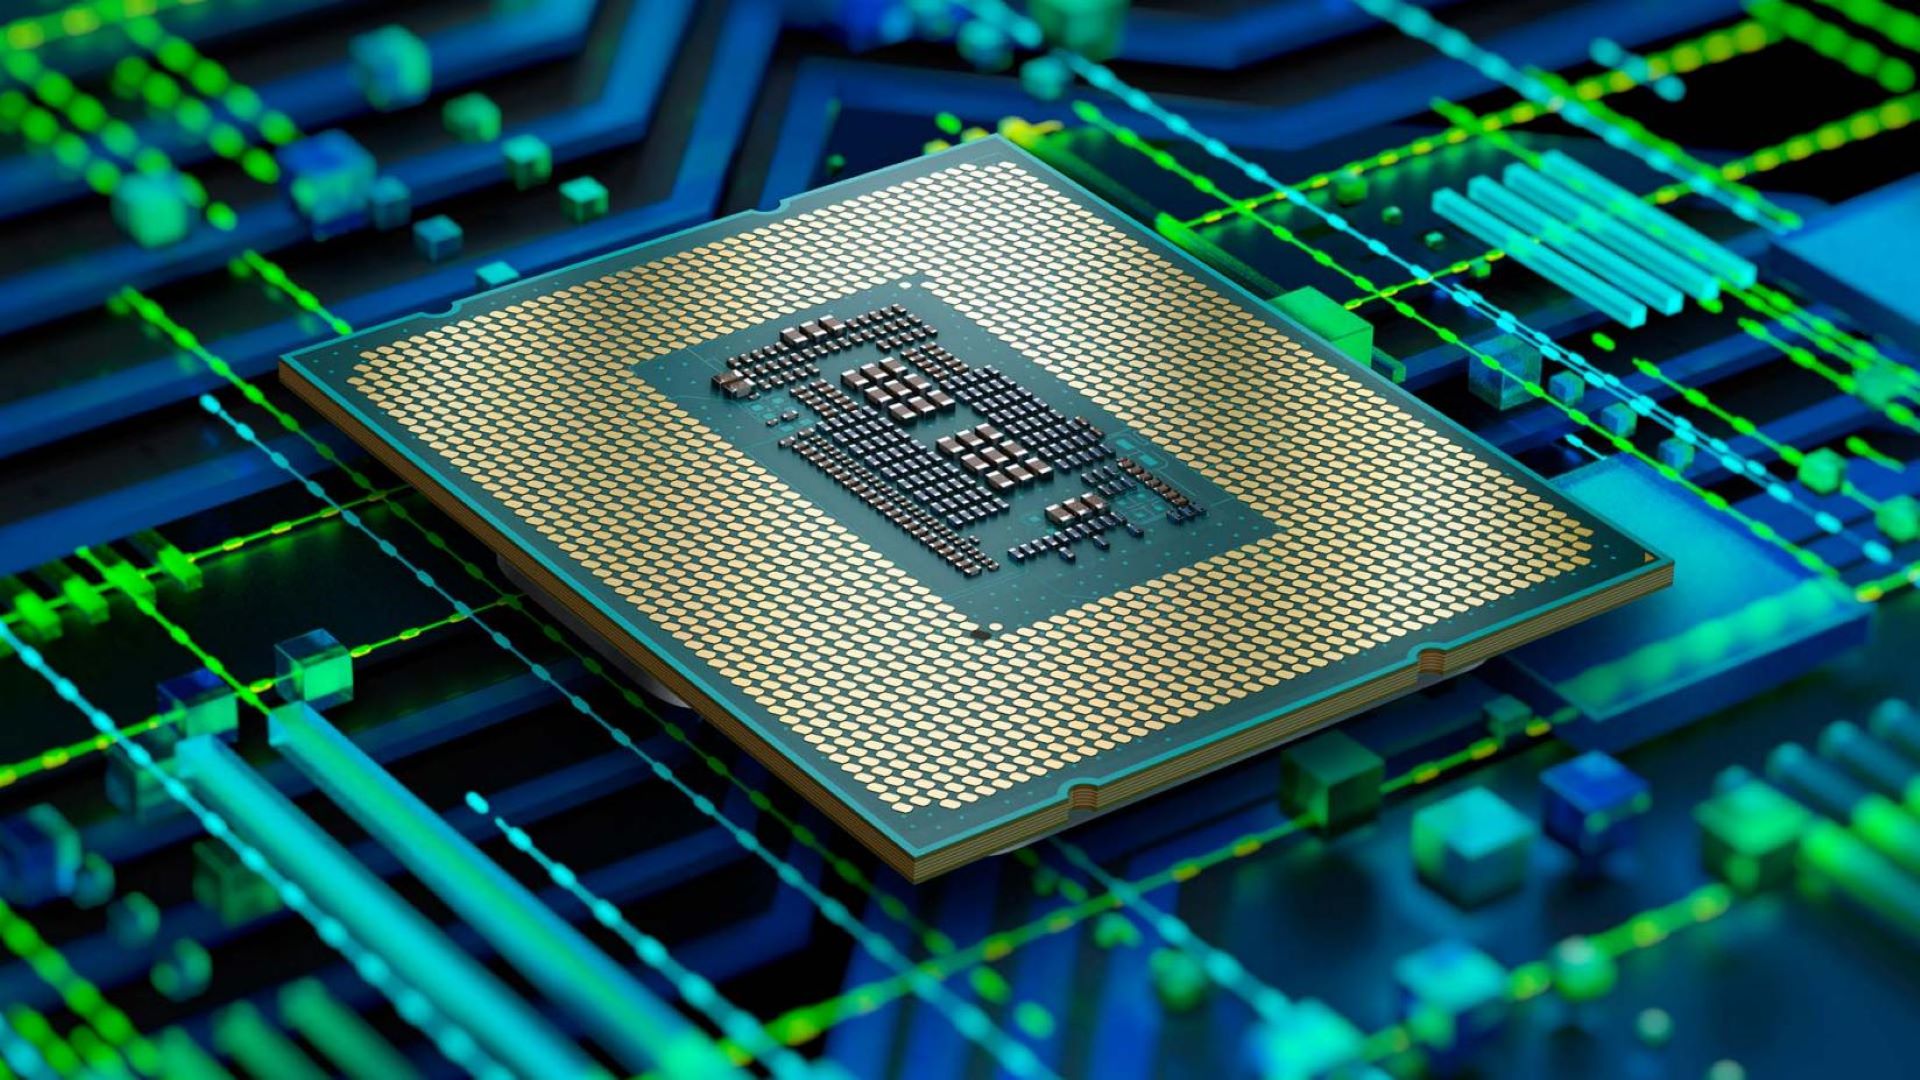 Intel Core i5 13400 performance mirrors 12600K in CPU benchmarks